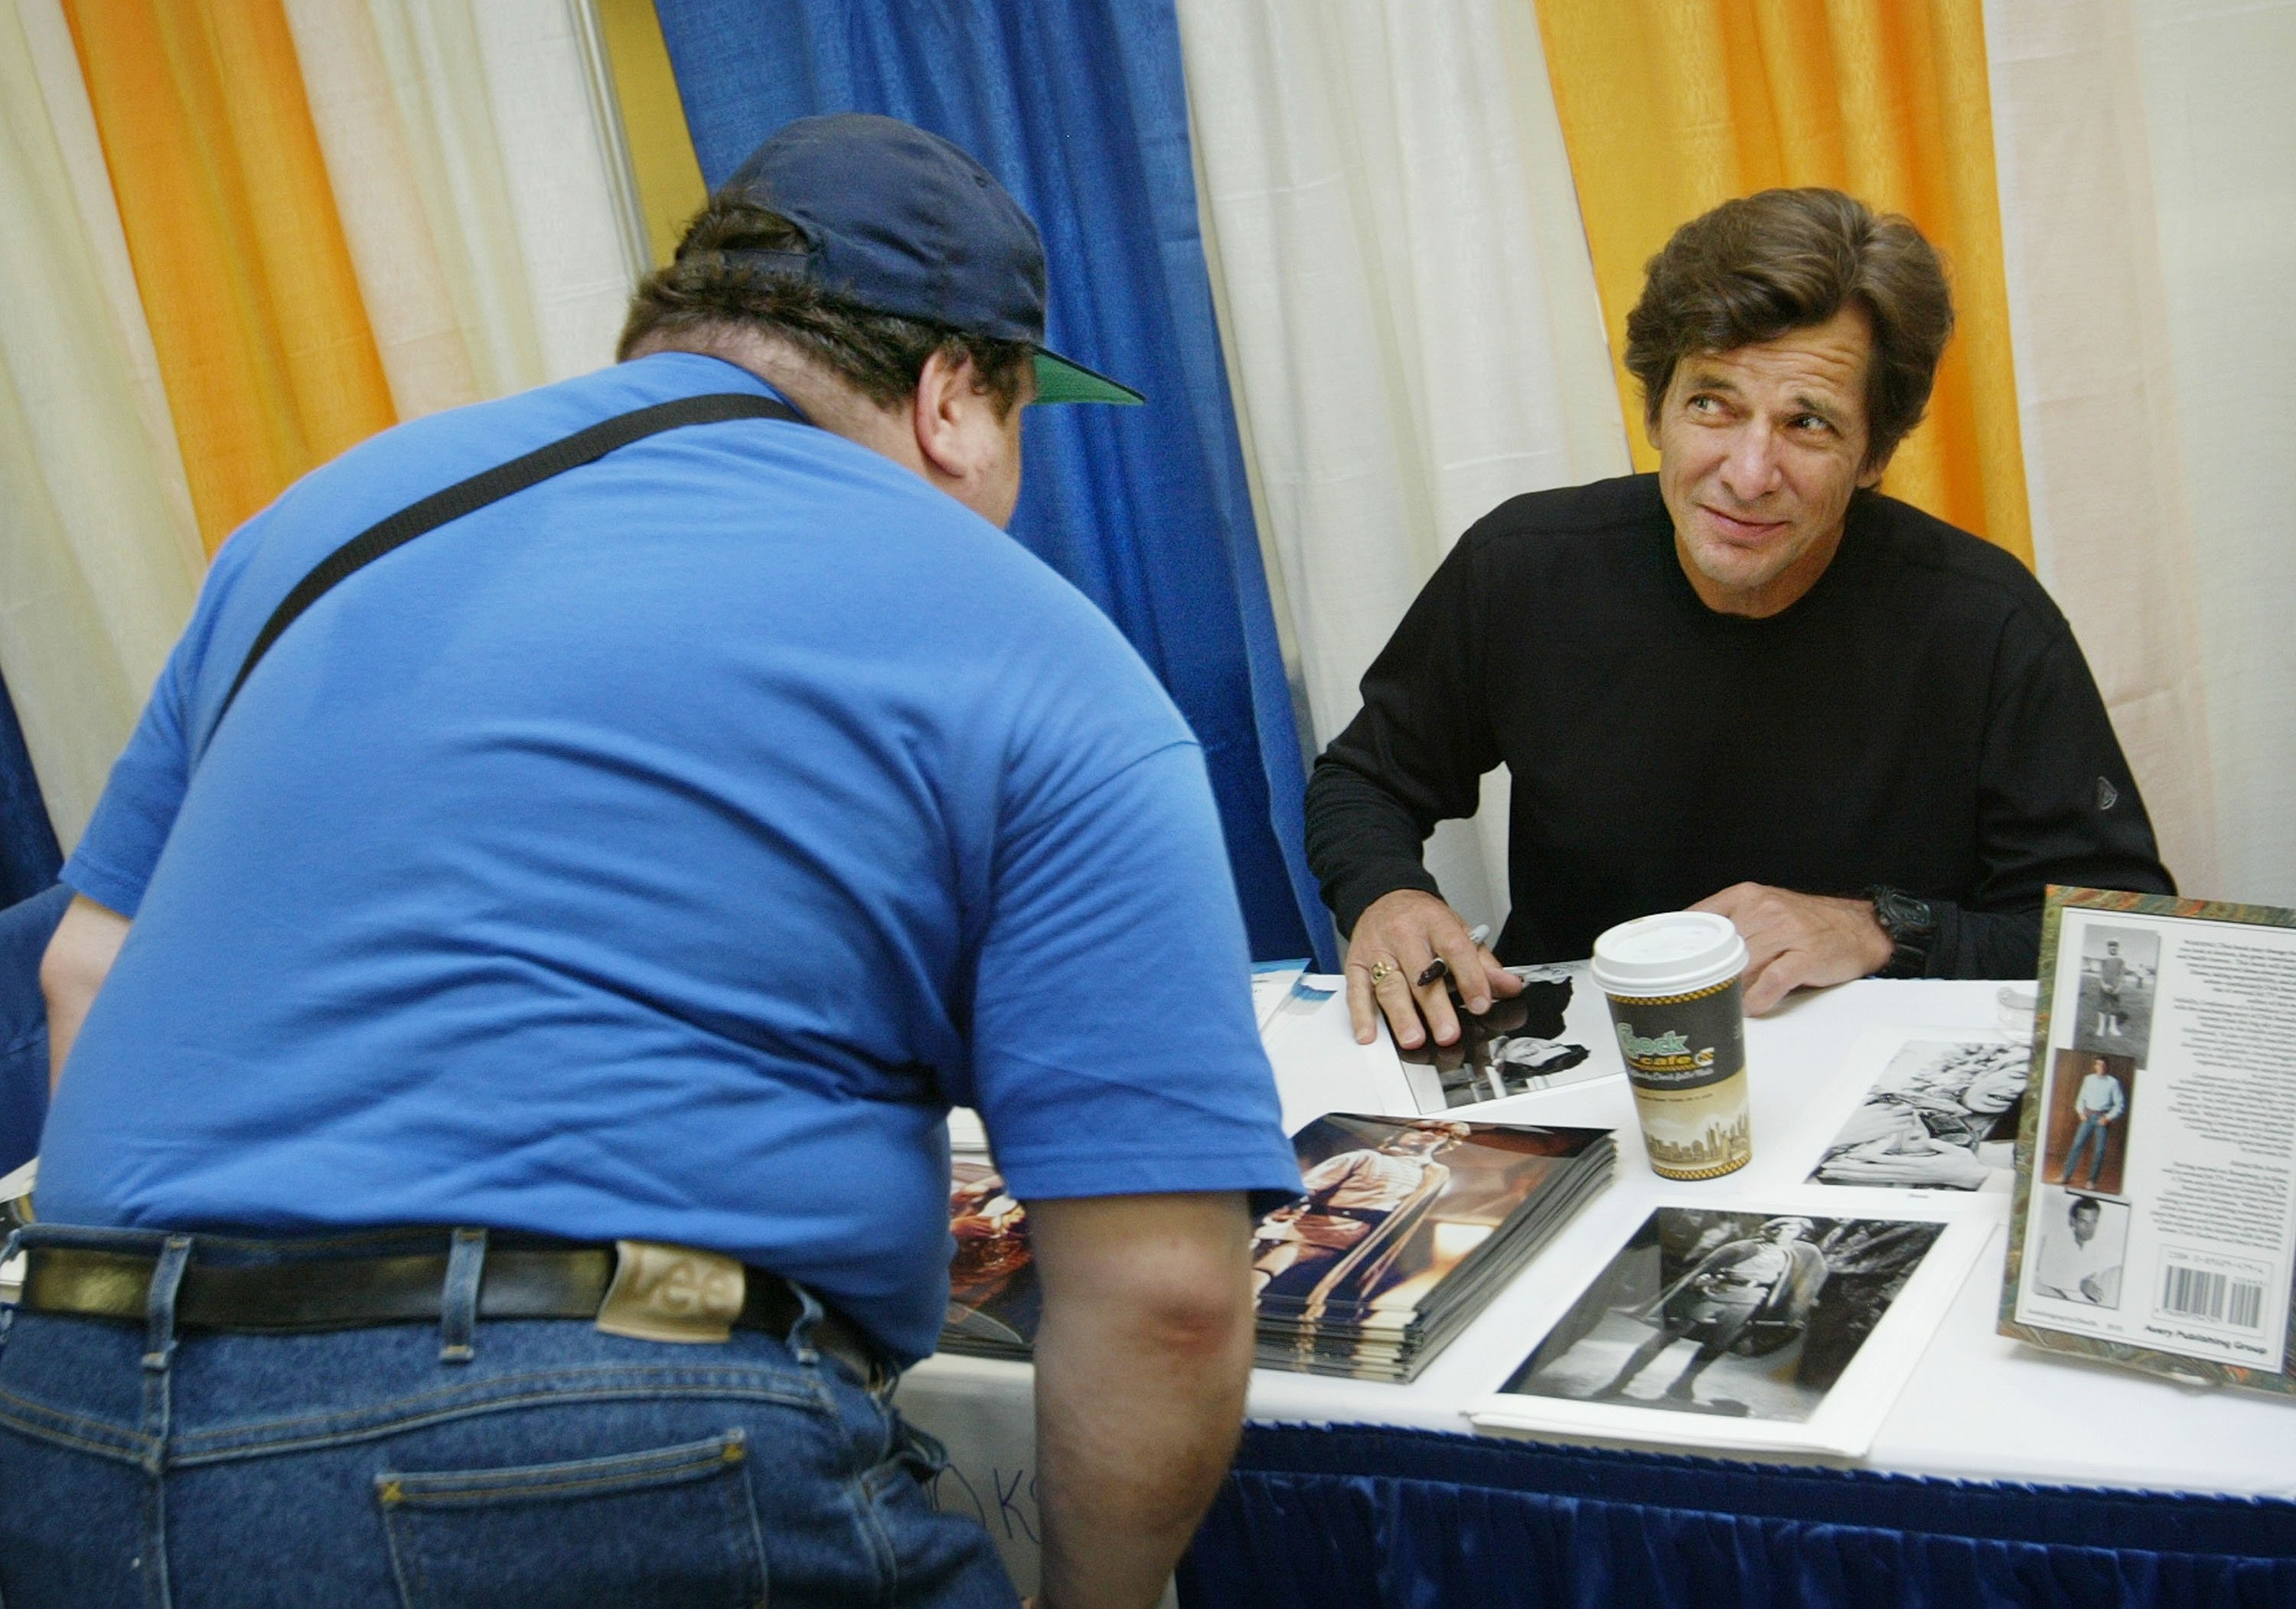  Dirk Benedict talks to a fan at the Sci-Fi and Fantasy Creators Convention June 27, 2003 in New York City. | Photo: Getty Images